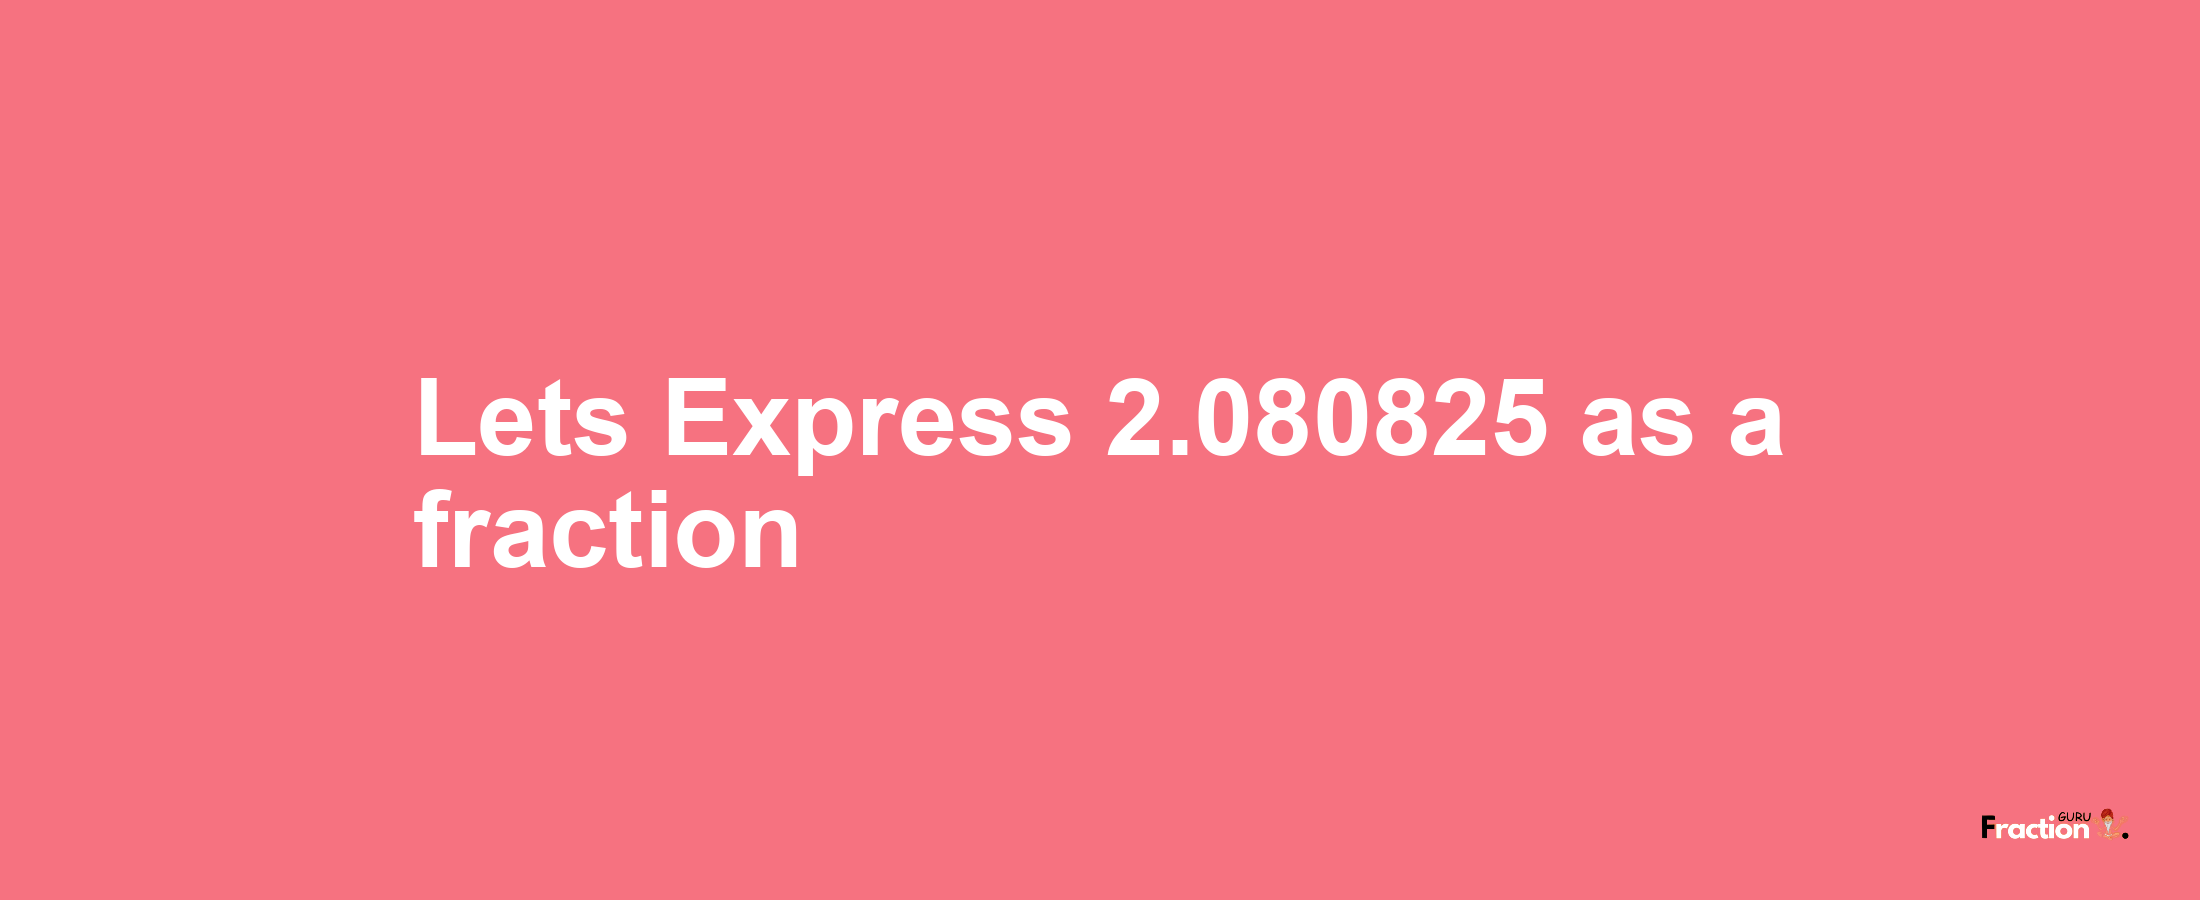 Lets Express 2.080825 as afraction